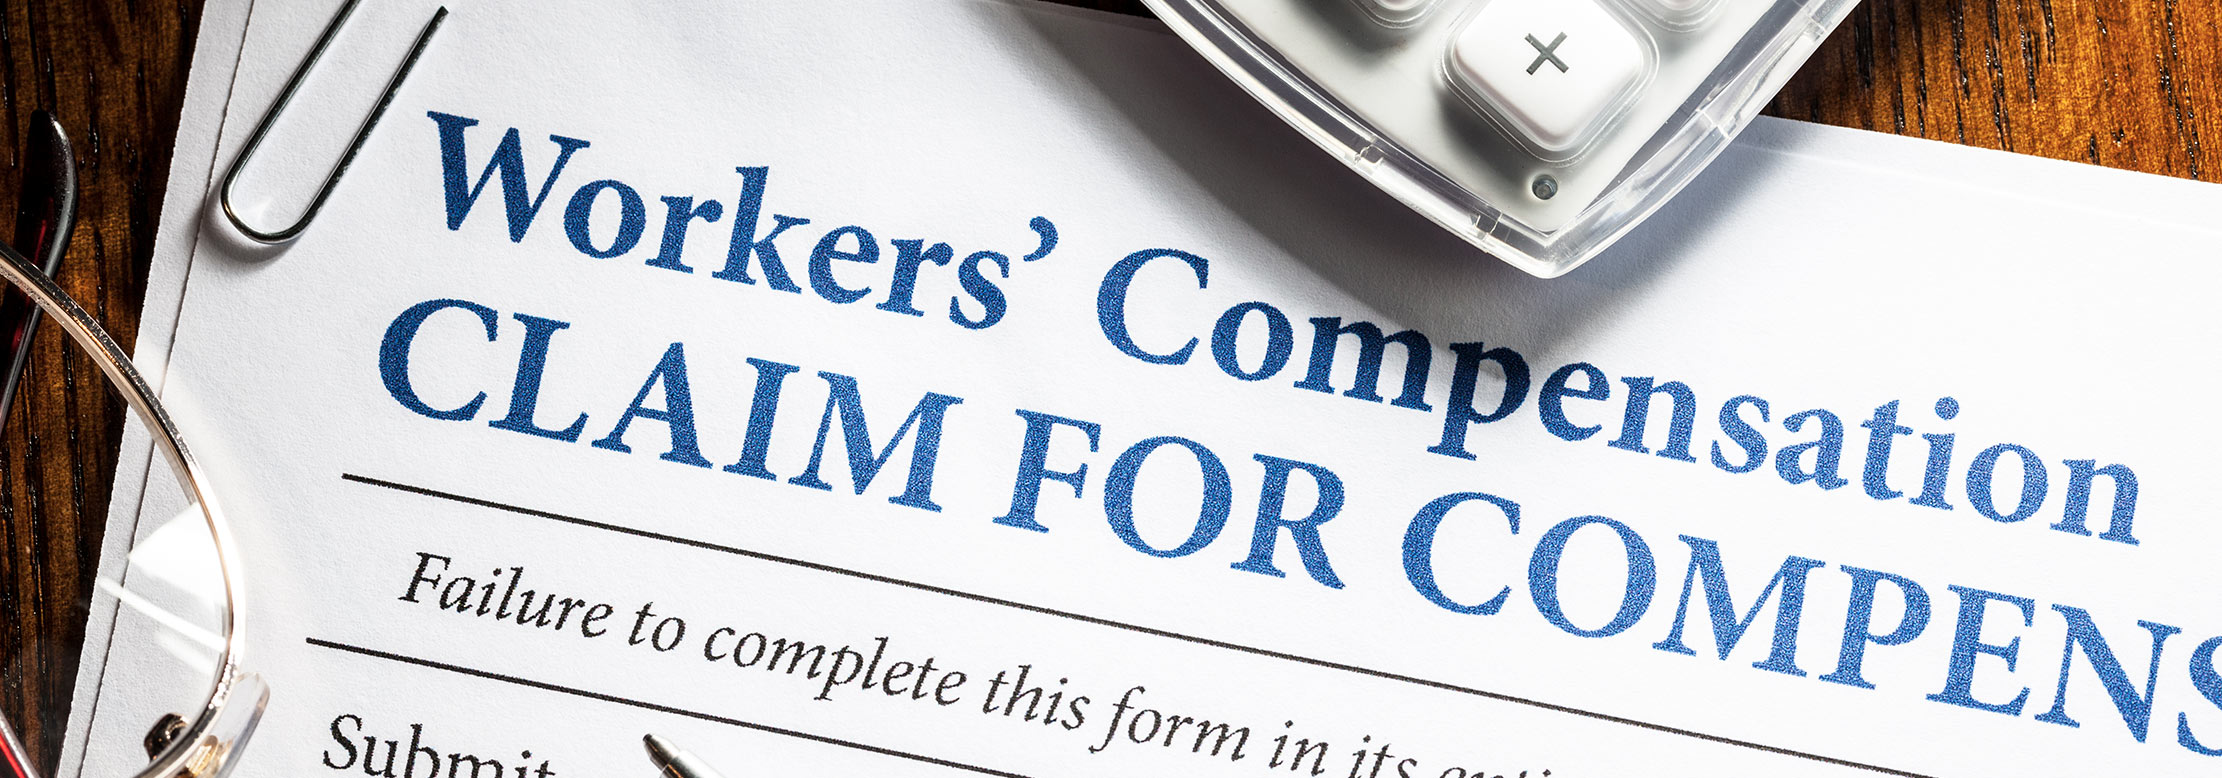 Workers Compensation Claim Form.